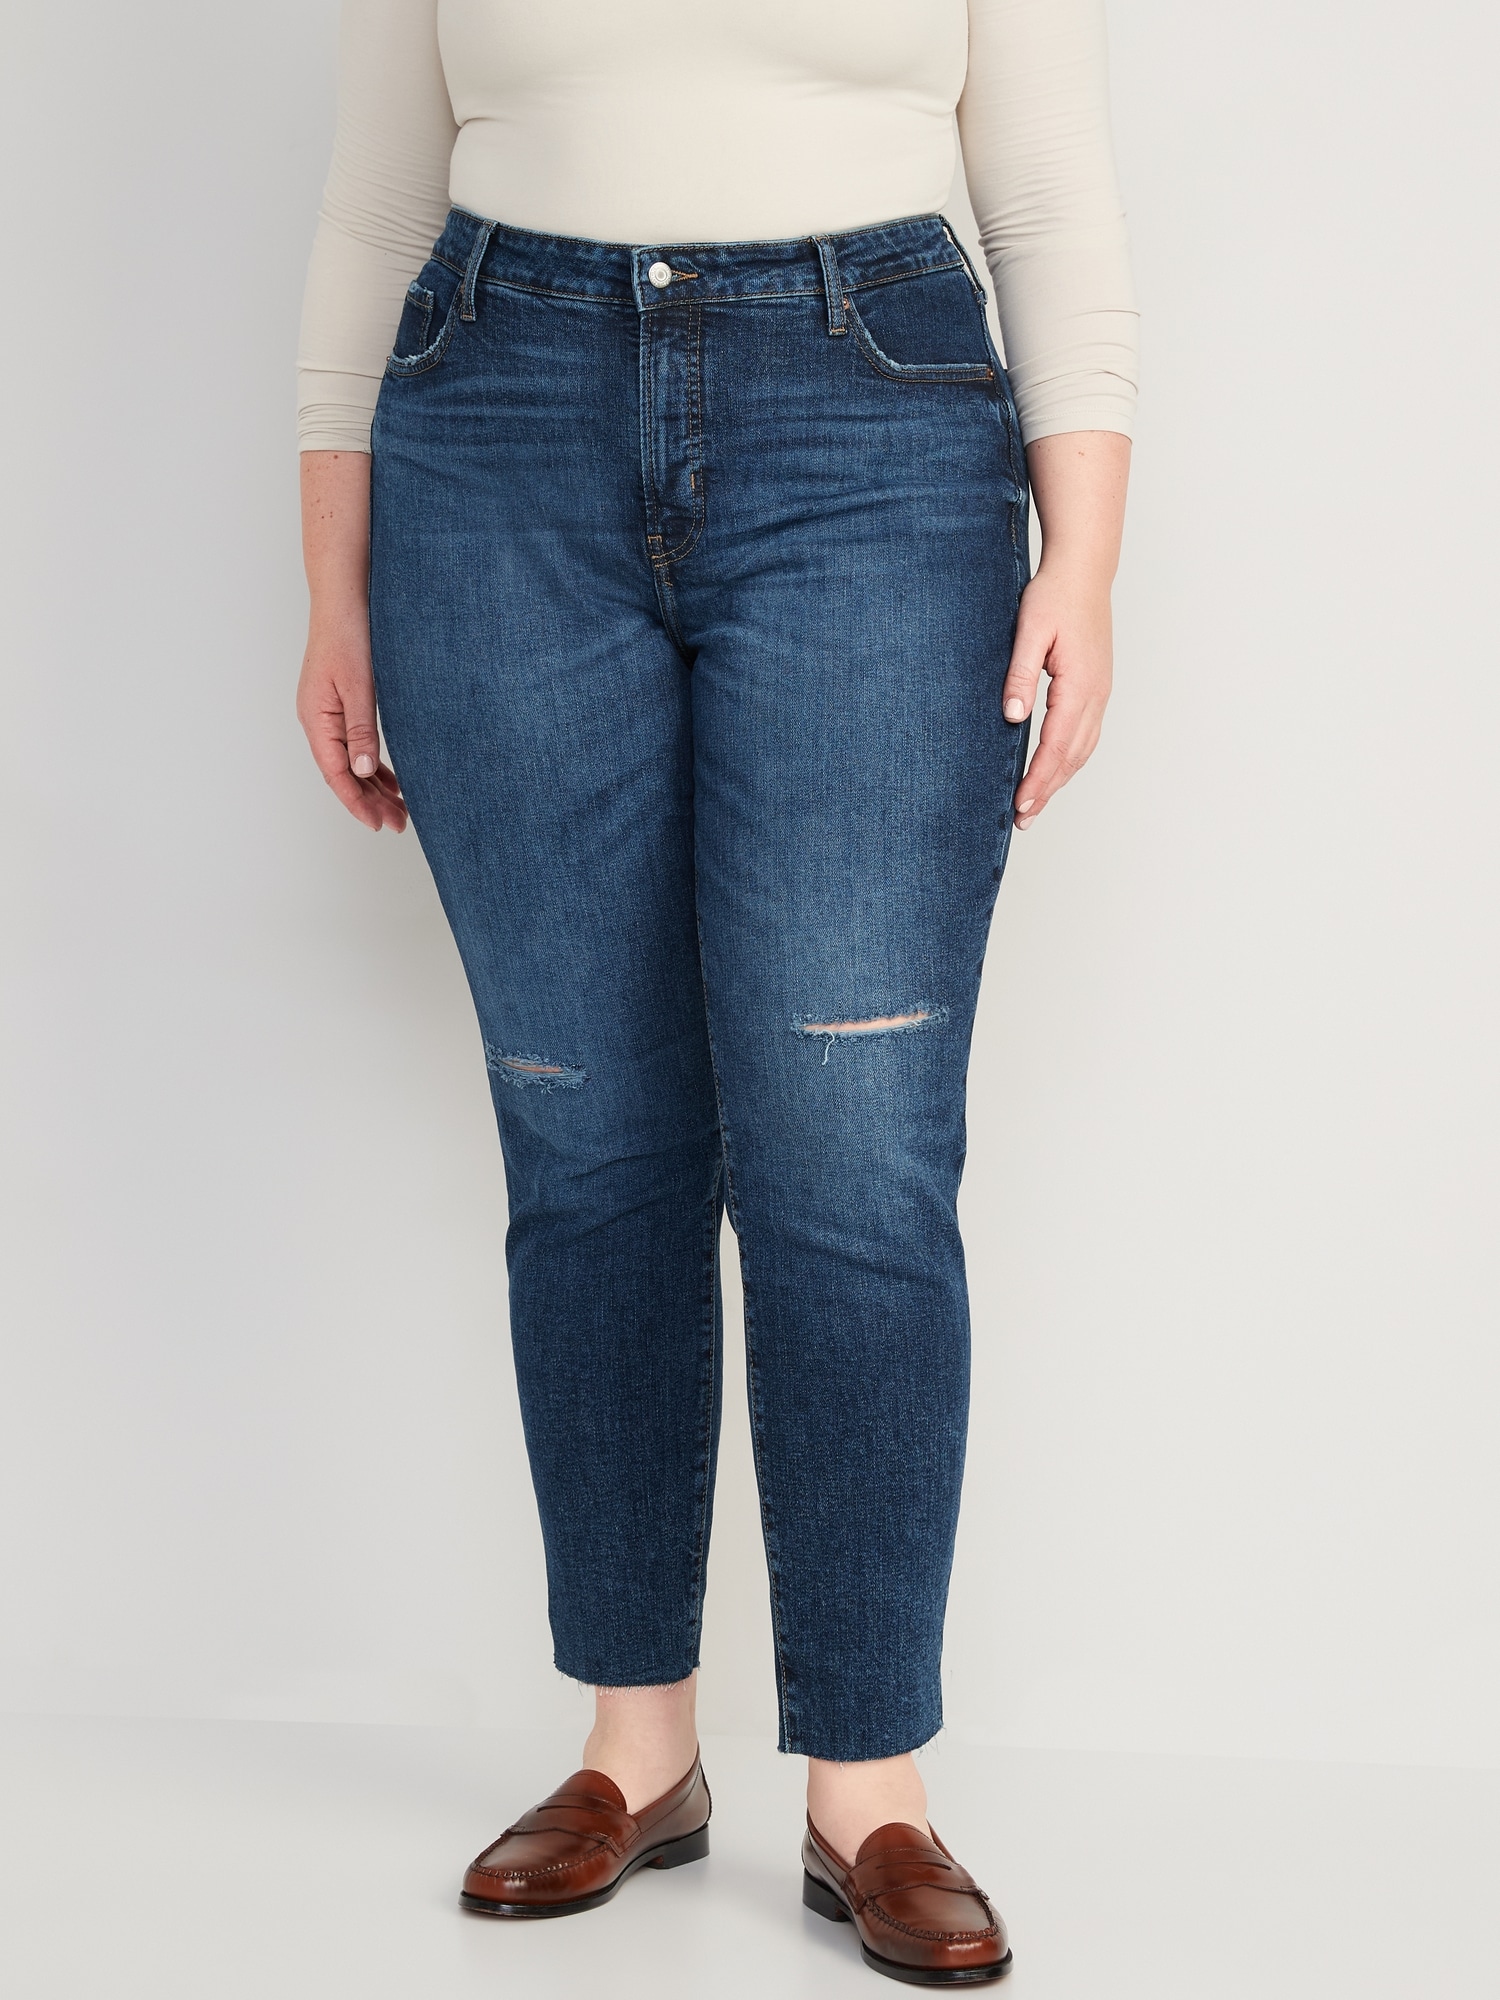 Women's Old Navy High-Waisted OG Straight Ripped Cut-off Jeans in Blue, Size  12